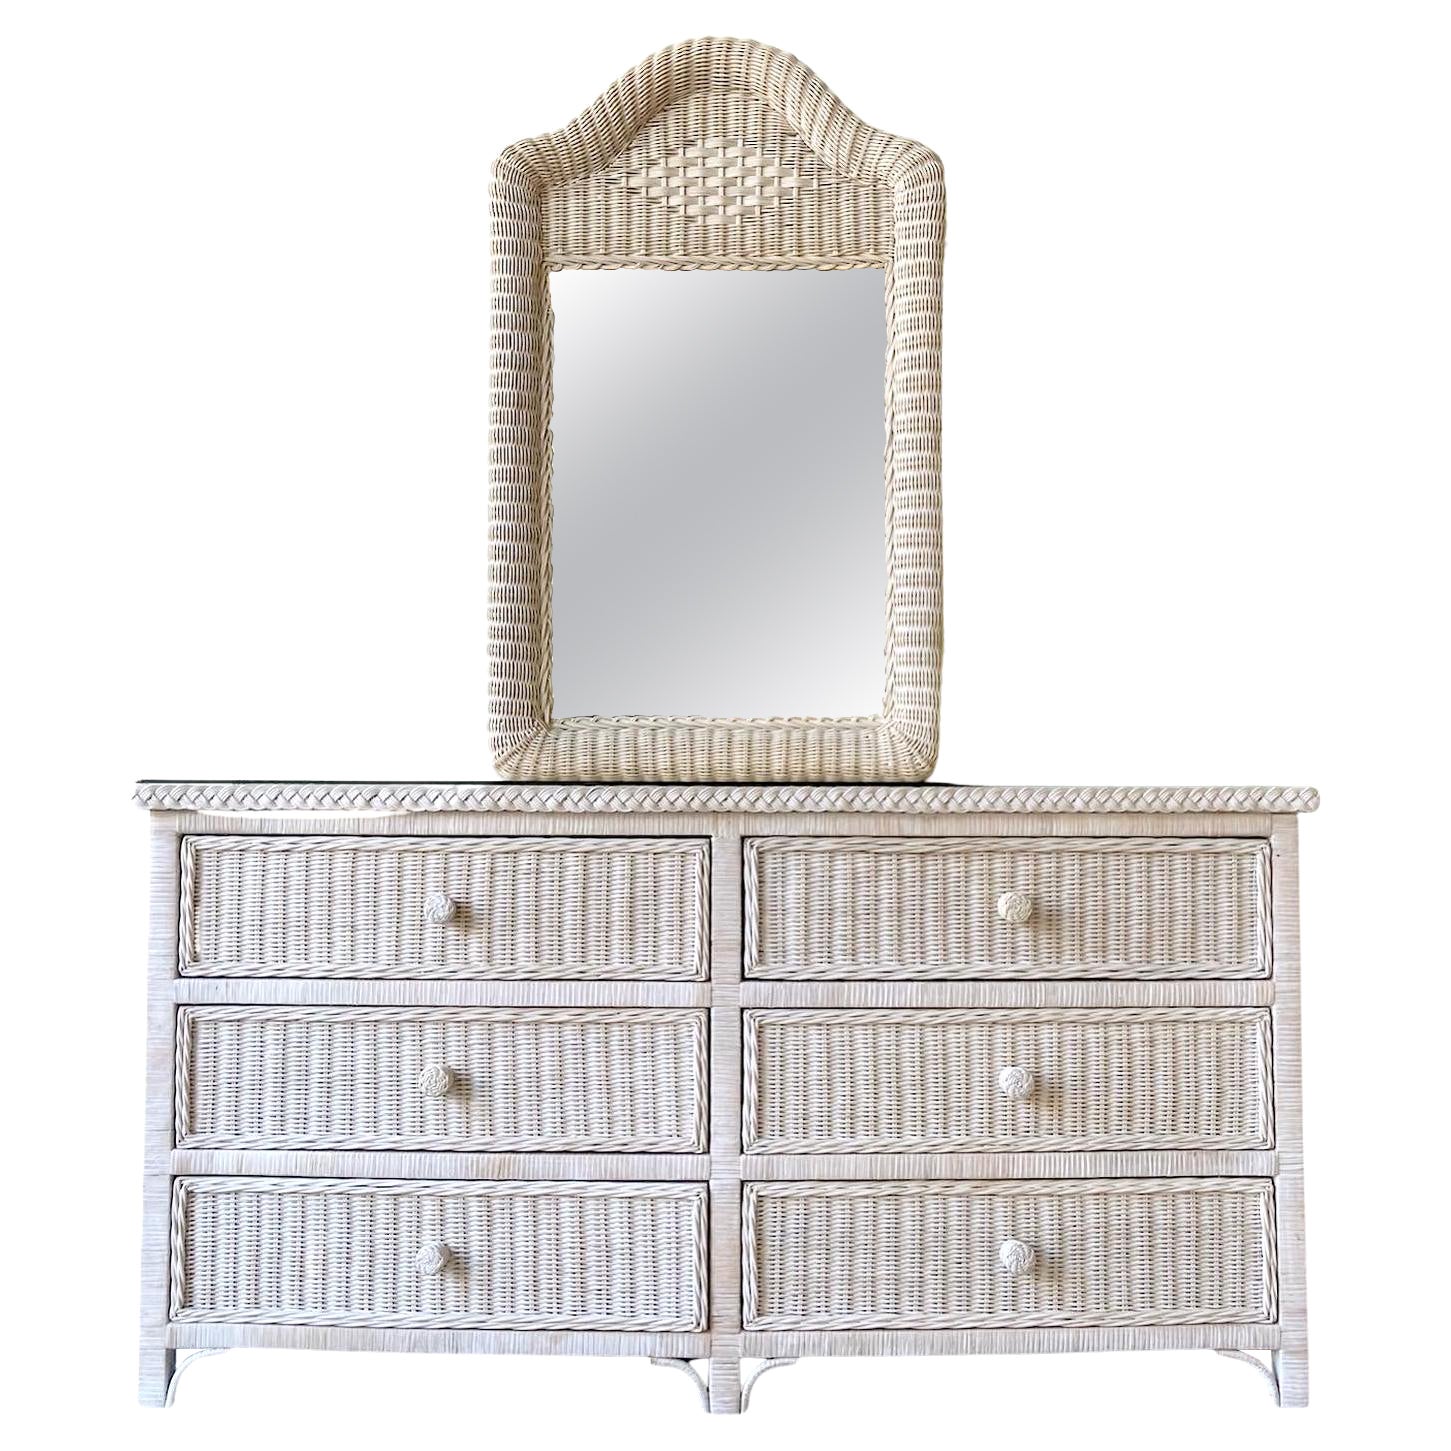 Boho Chic off White Wicker Glass Top Dresser with Mirror For Sale